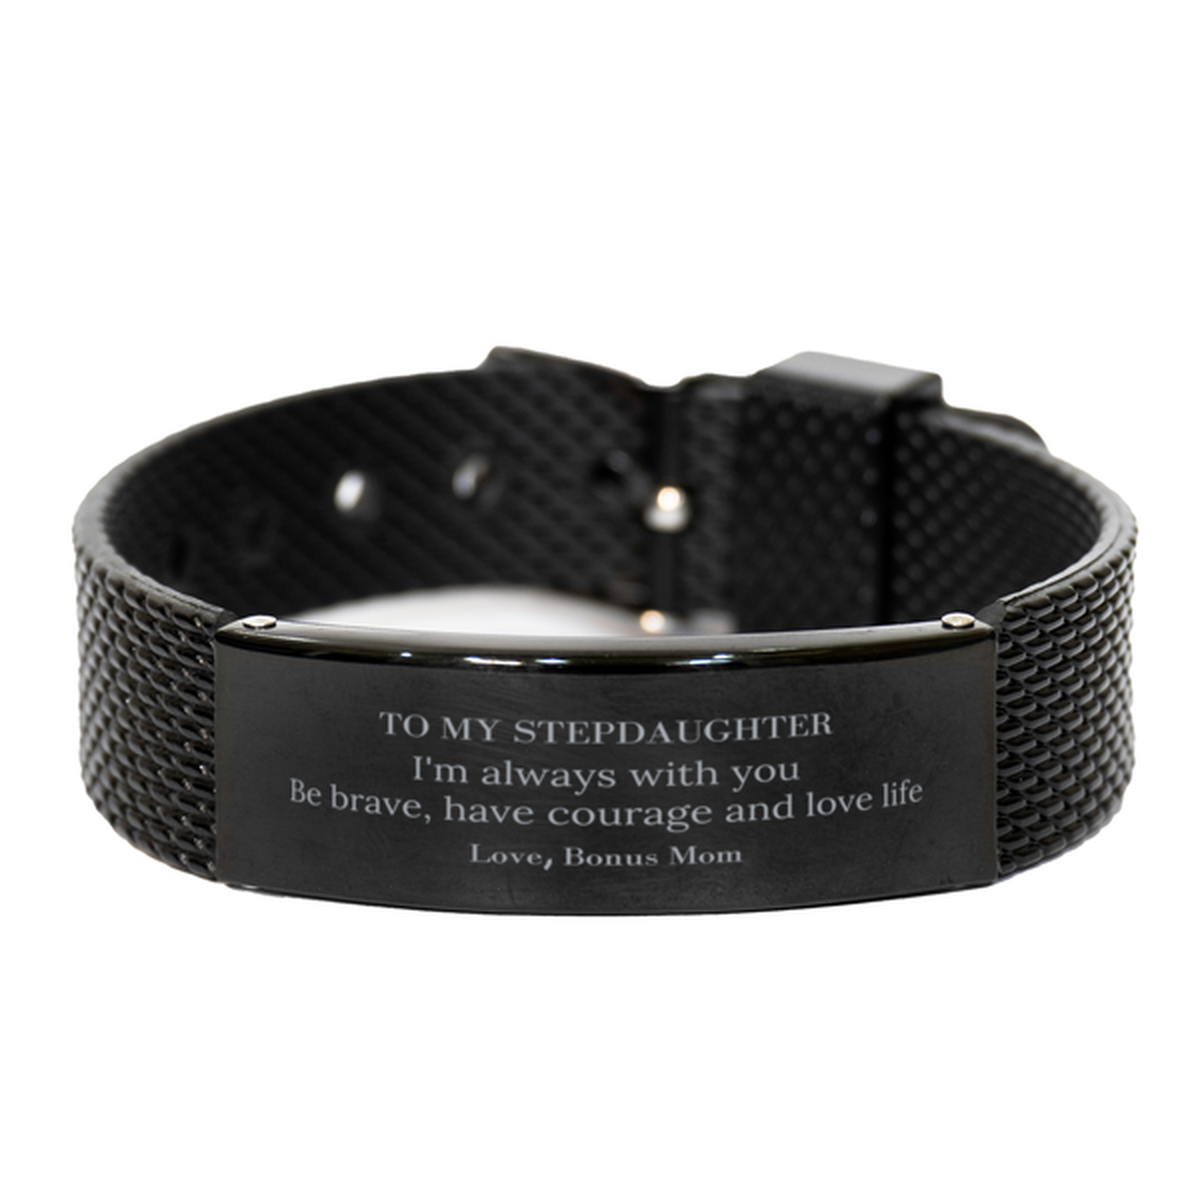 To My Stepdaughter Gifts from Bonus Mom, Unique Black Shark Mesh Bracelet Inspirational Christmas Birthday Graduation Gifts for Stepdaughter I'm always with you. Be brave, have courage and love life. Love, Bonus Mom